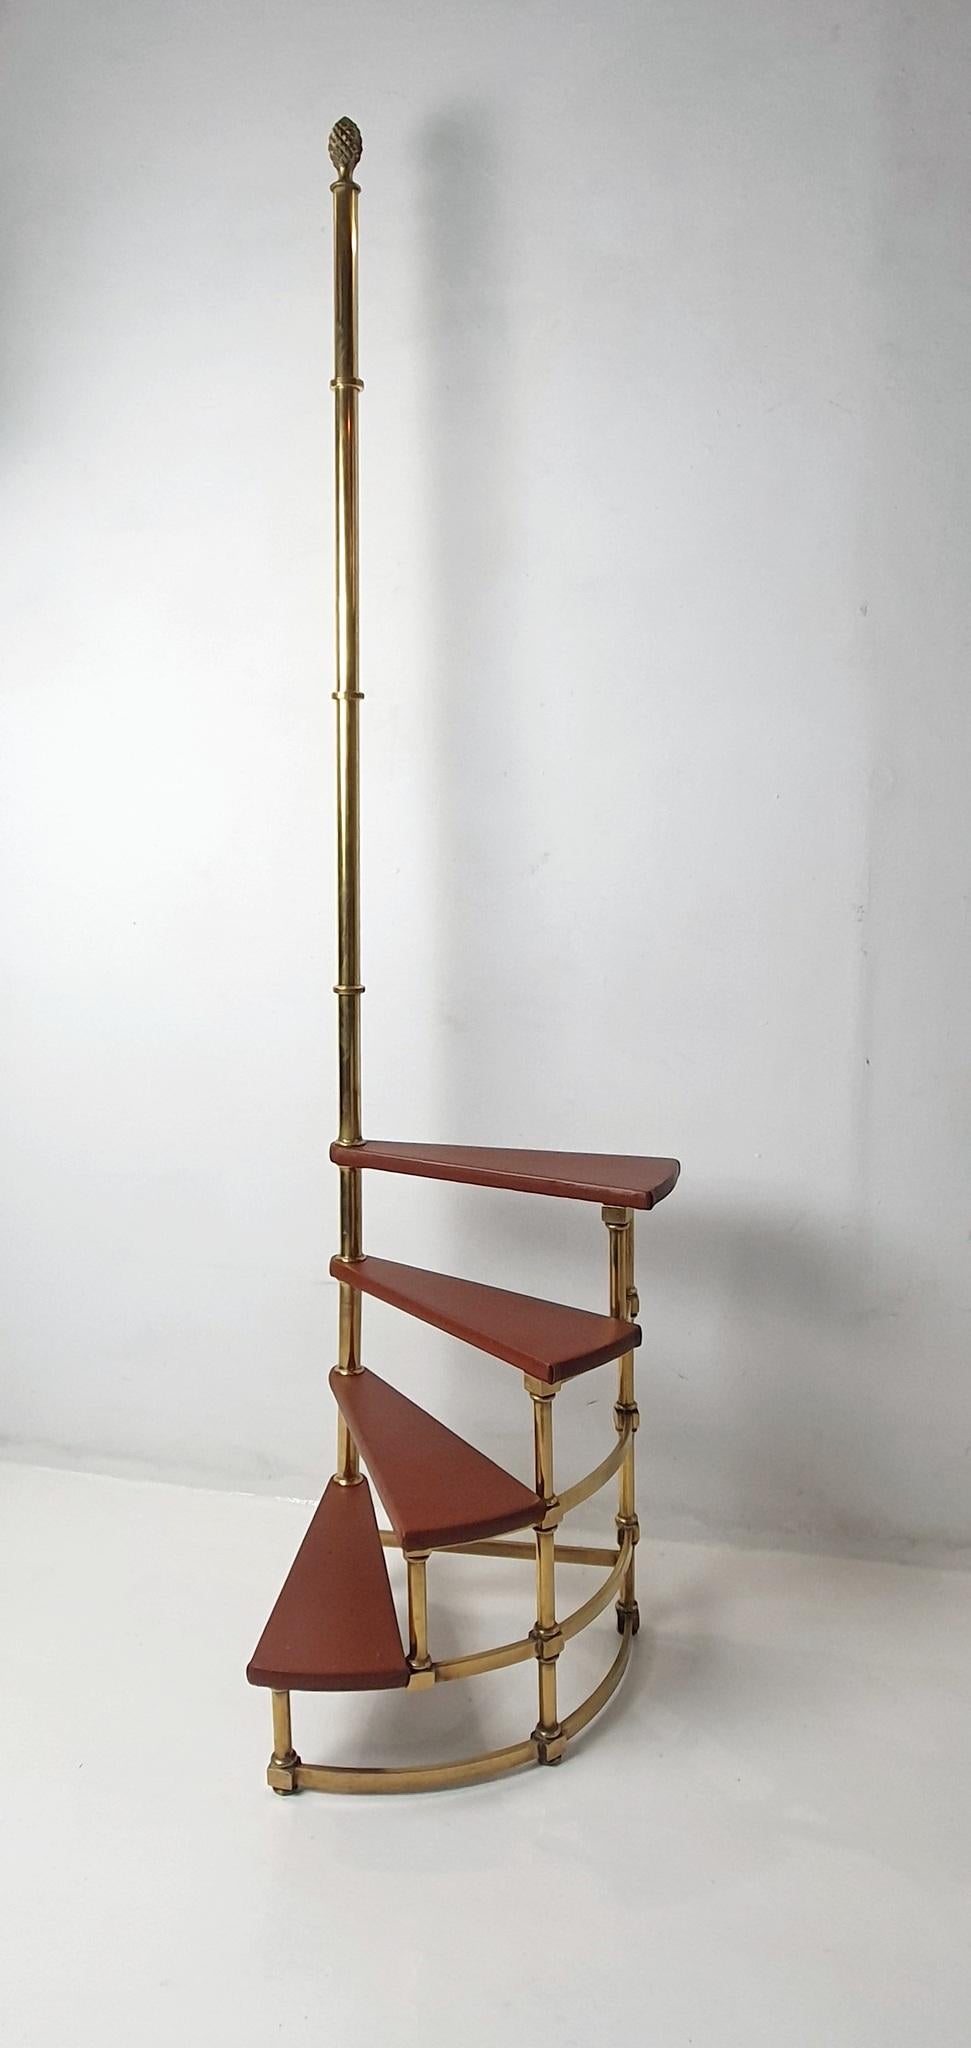 
The 19th-century French library step ladder is an ideal antique to enhance any space. With a semi-circular design and four stairs surrounding a central post, it exudes elegance. This piece has been fully restored and polished. Hand crafted with new